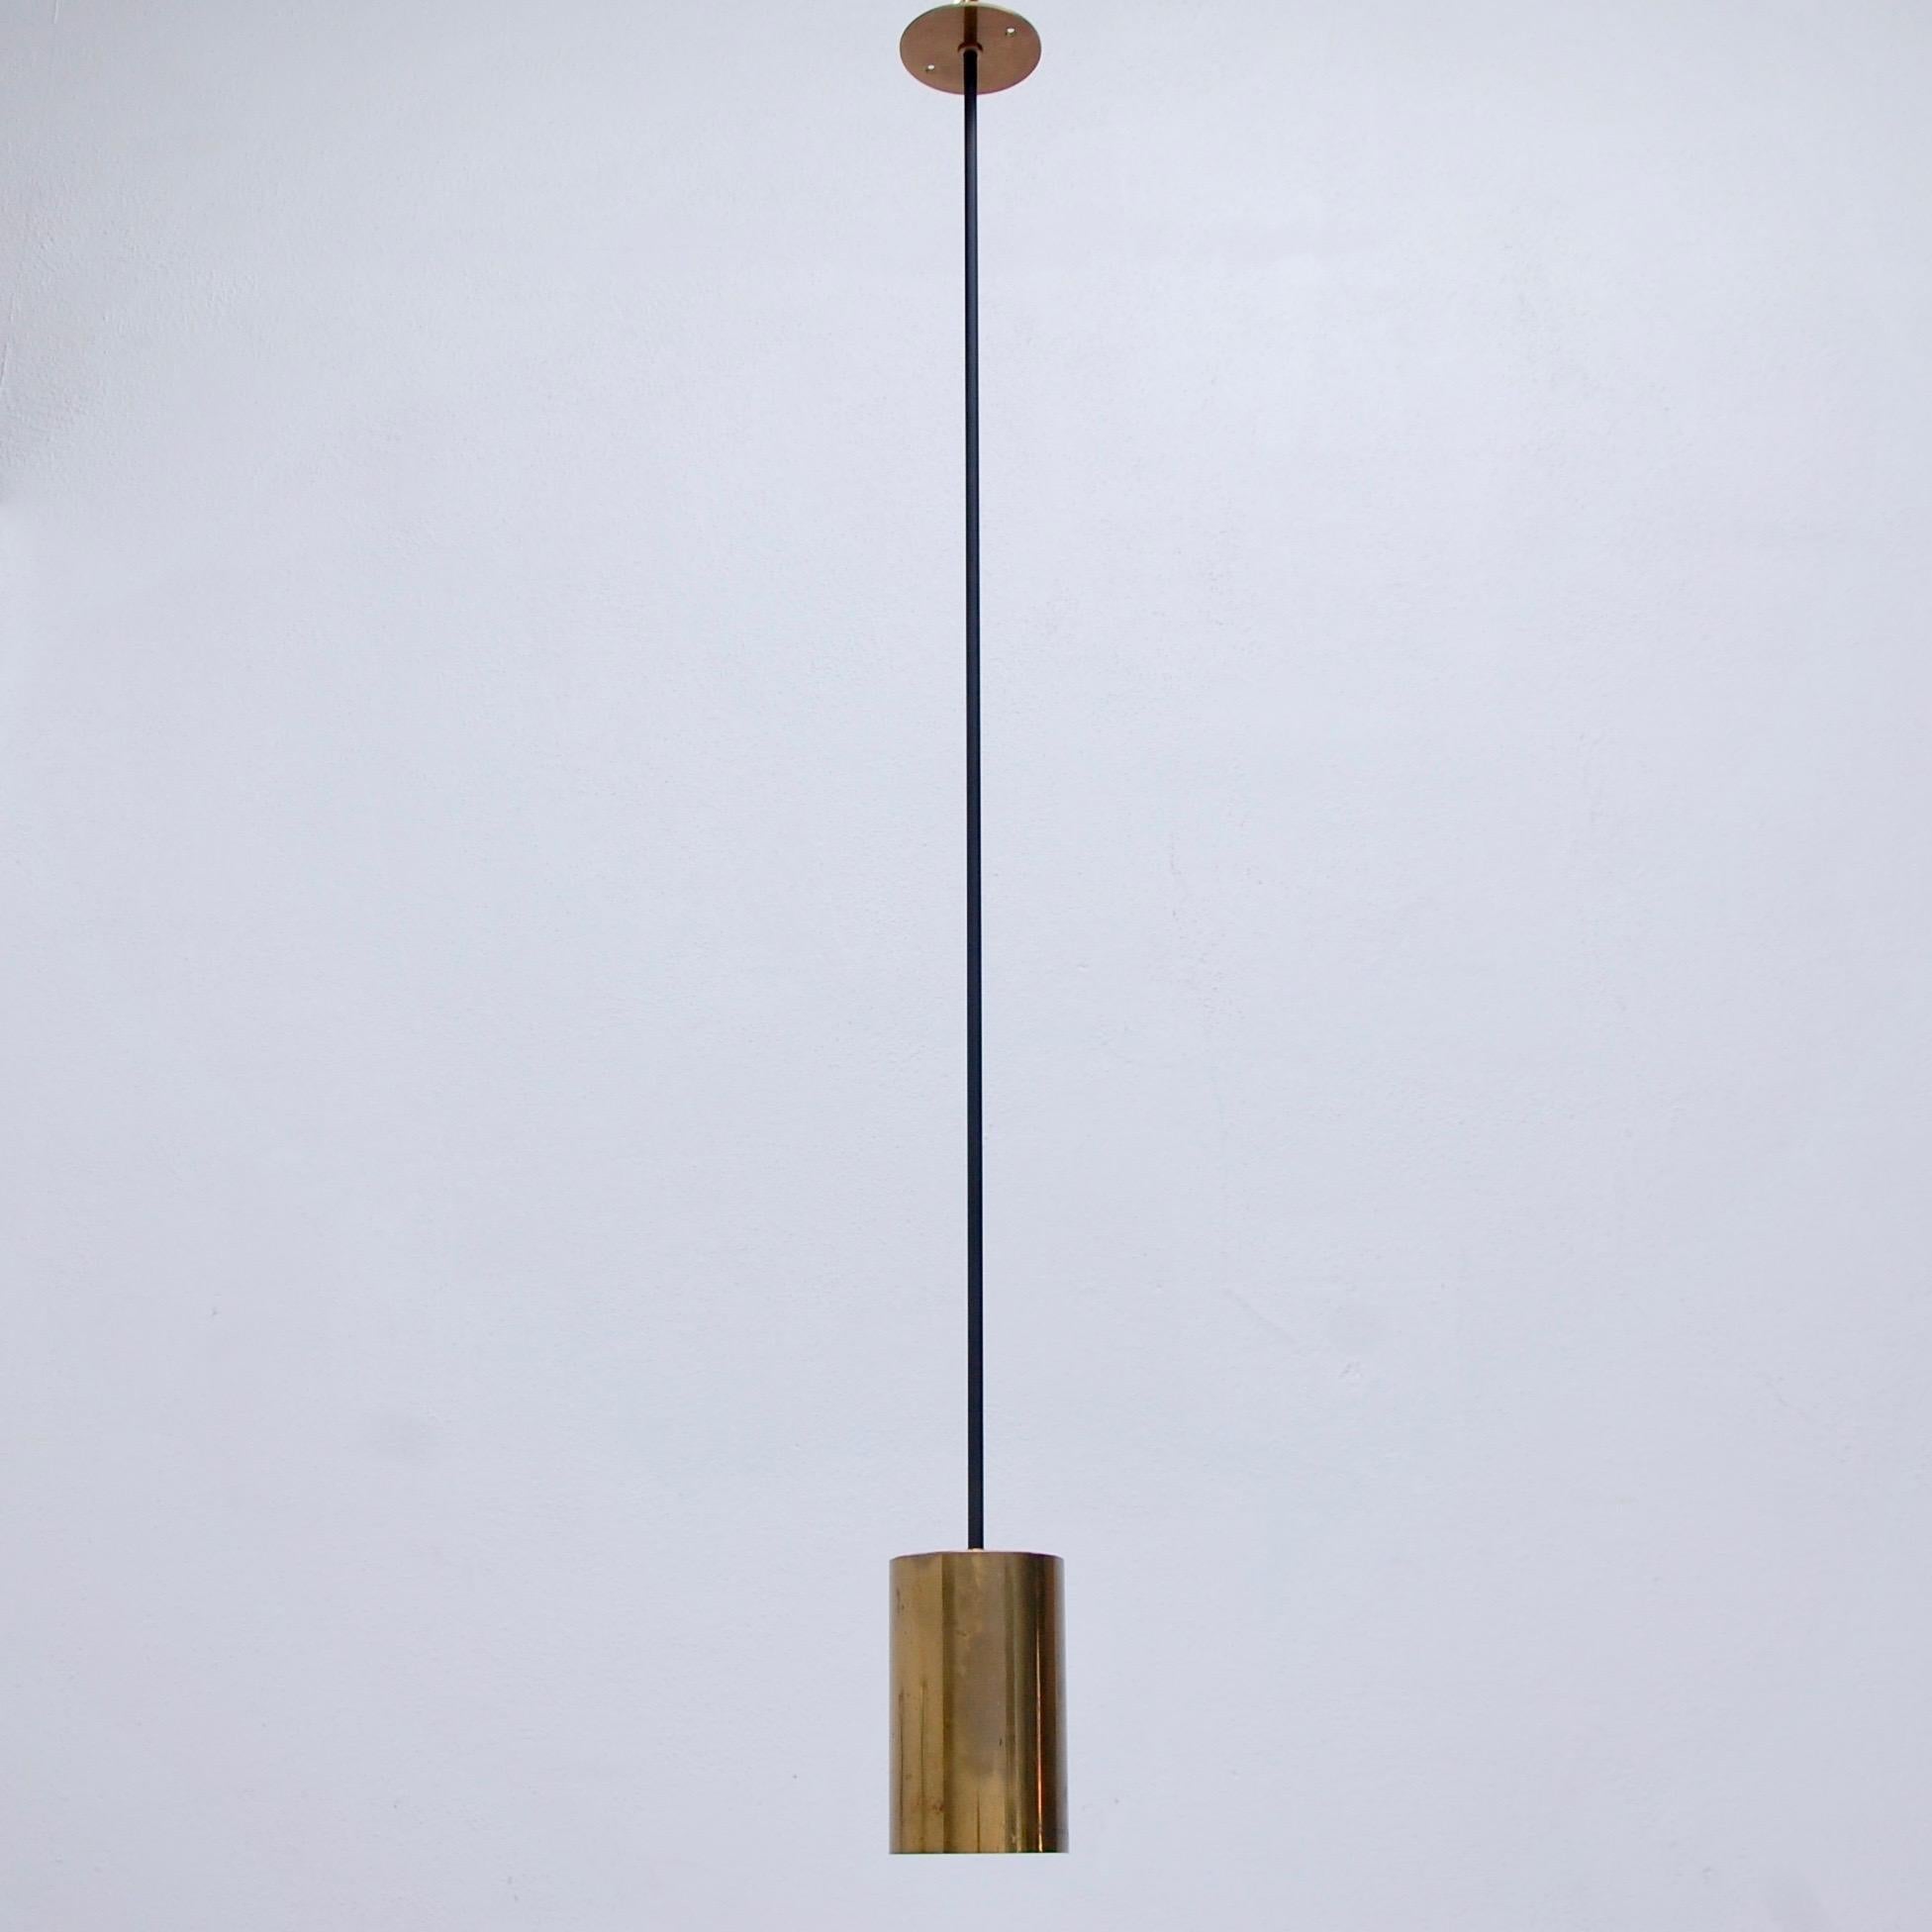 (3) Directional pendants by Boris Lacroix, 1950s France. Brass and painted steel finish. Original aged finish. Wired for use in the US. OAD can be adjusted upon request. Single E26 medium based light socket per pendant. Priced individually. Light